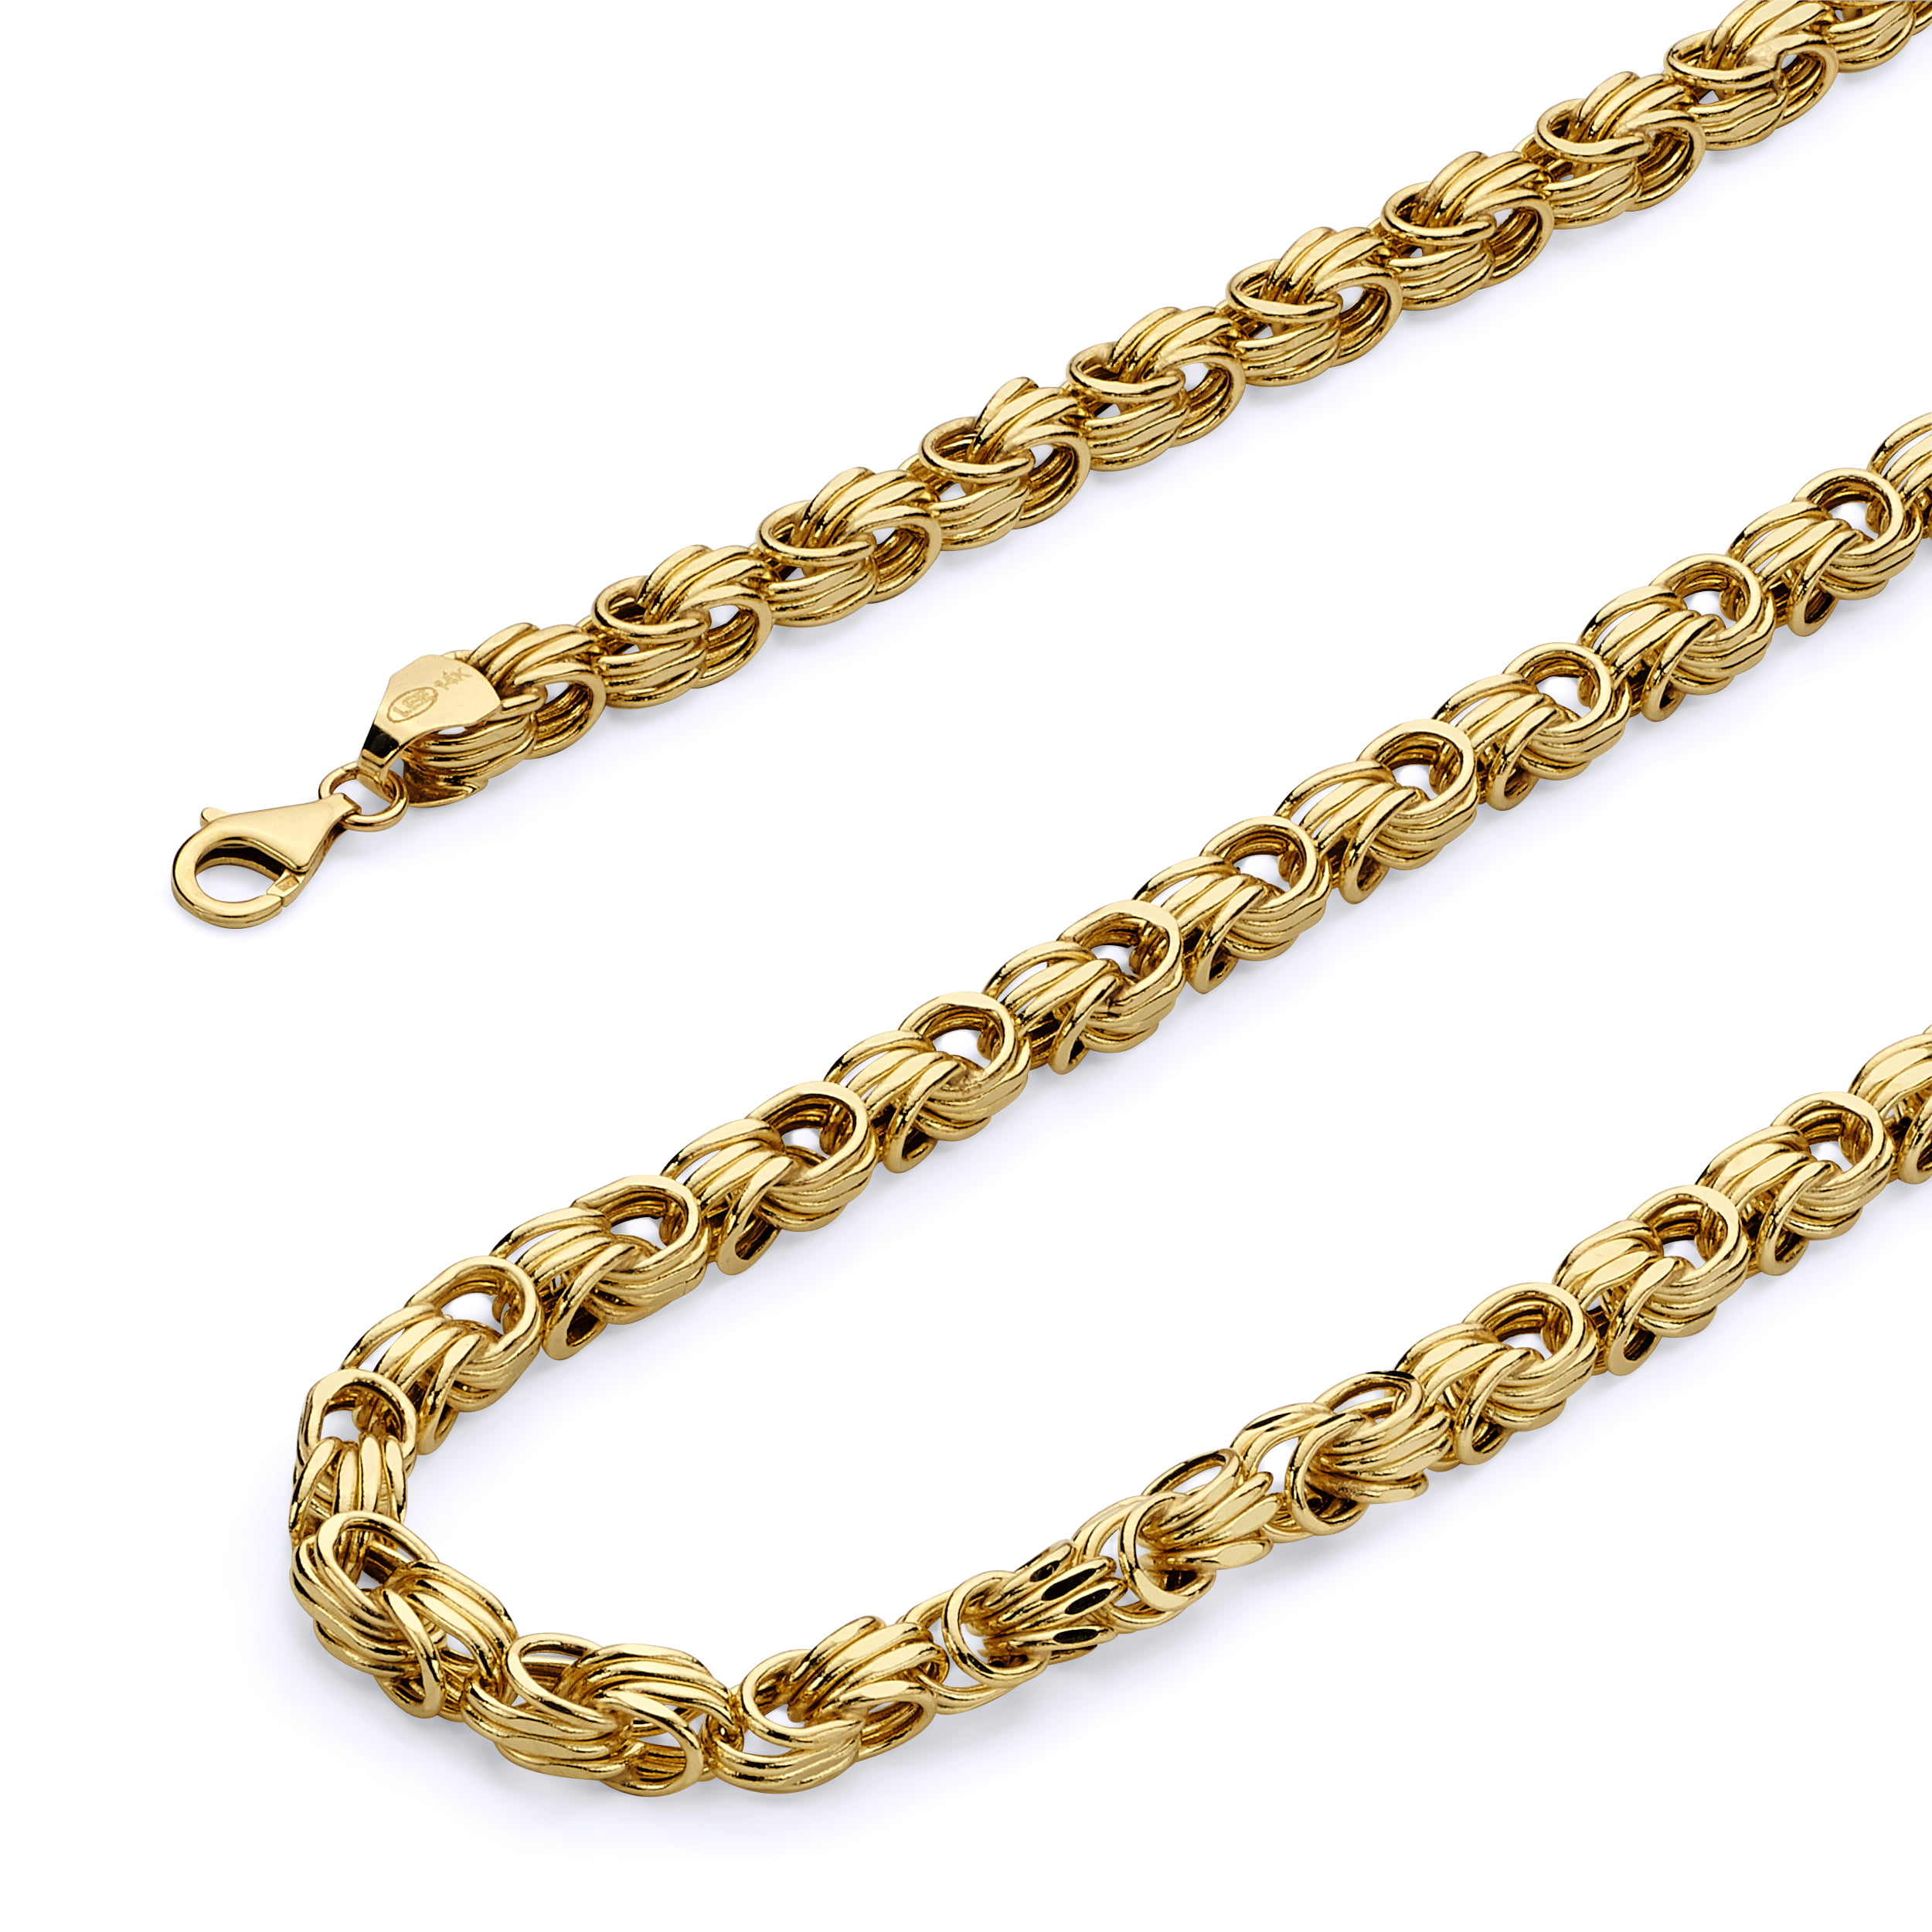 Wellingsale 14k Yellow Gold 2.5mm Diamond Cut HOLLOW Rope Chain Necklace with Lobster Claw Clasp